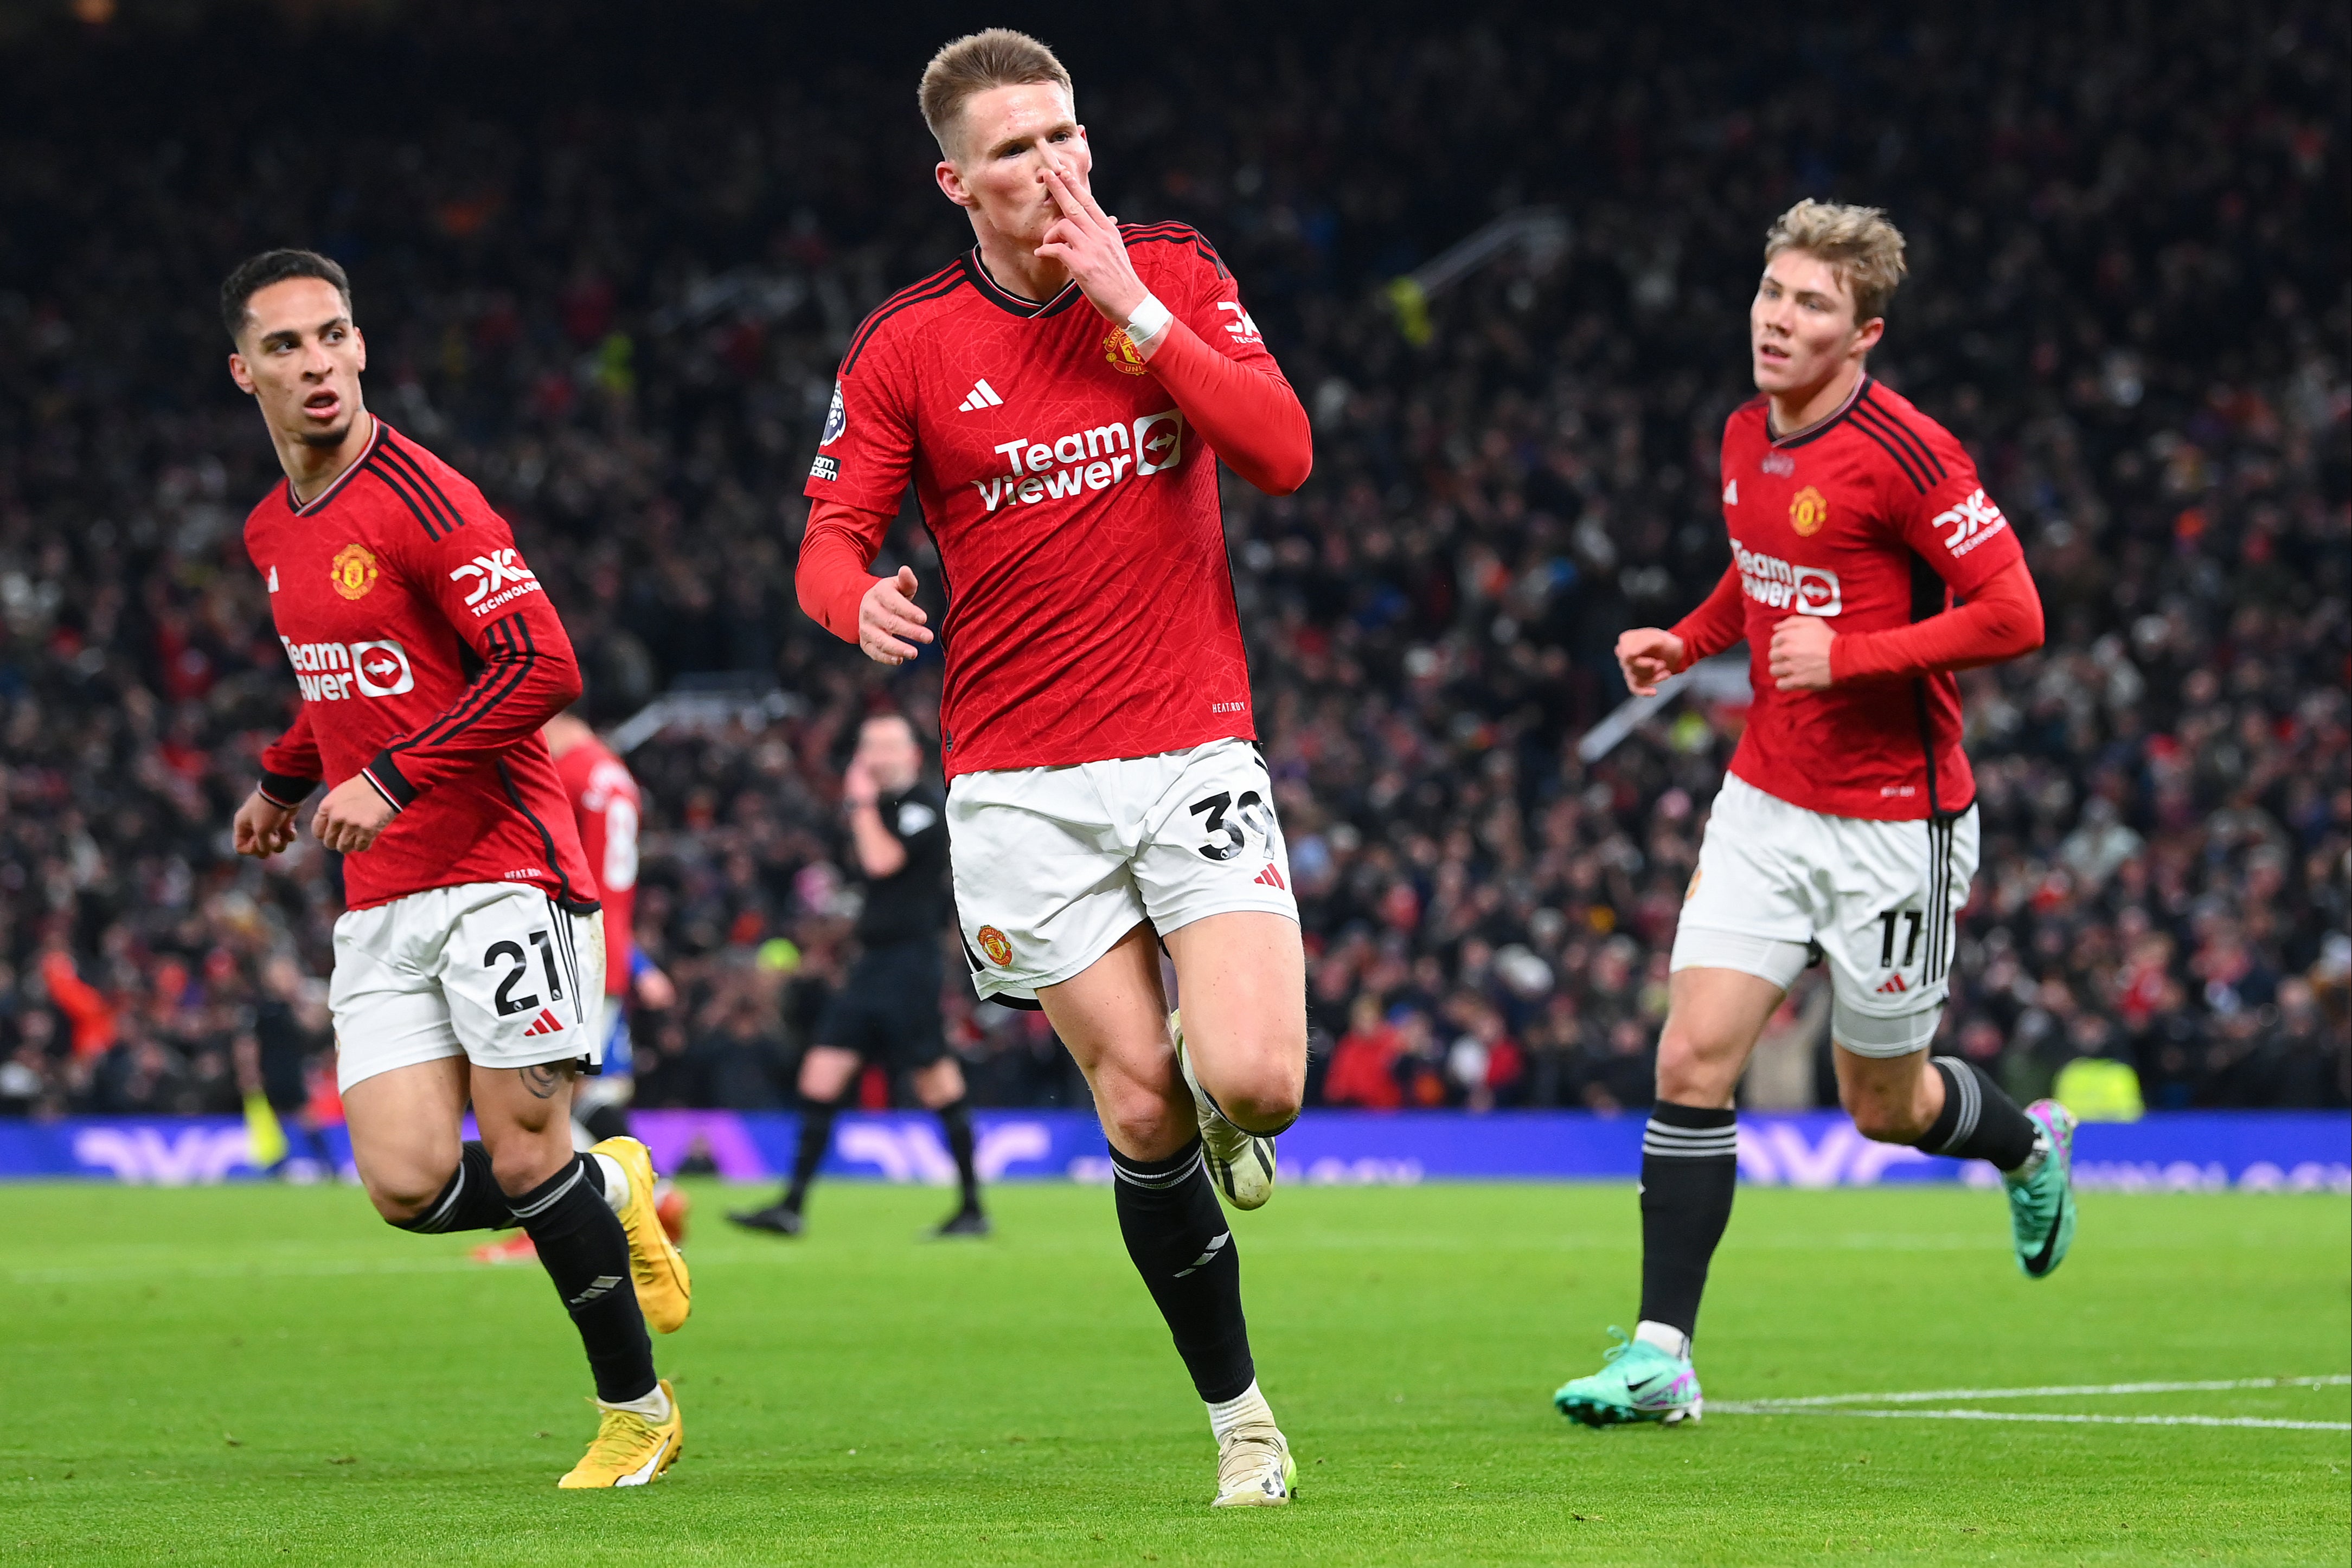 Scott McTominay has impressed after being linked with a move away from Old Trafford